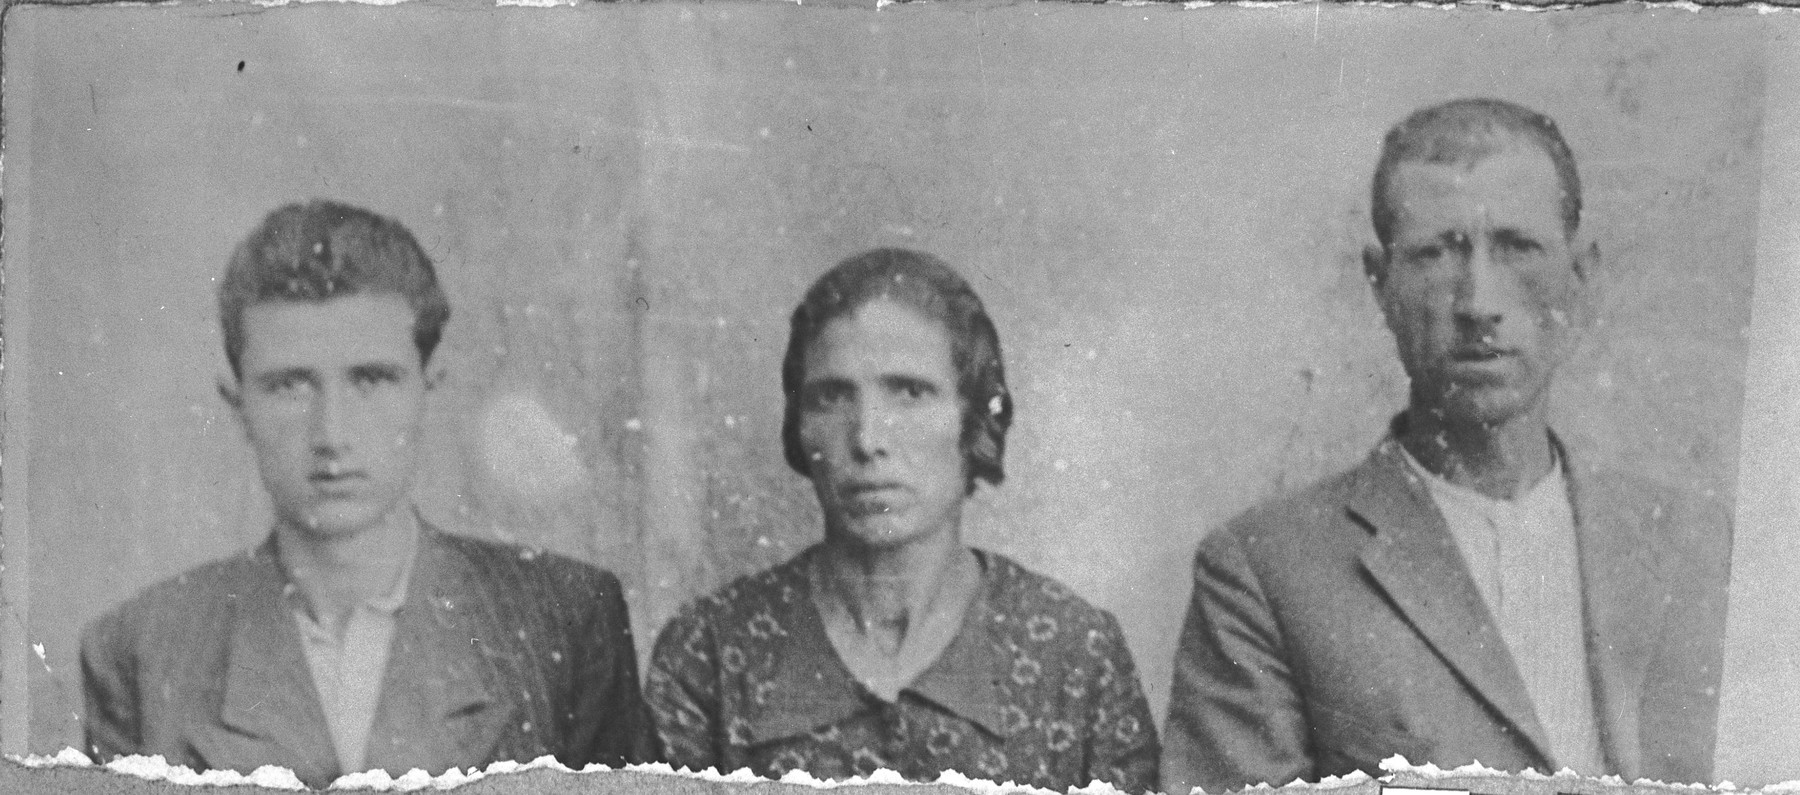 Portrait of Bohor Kamchi, son of Mushon Kamchi, Bohor's wife, Louisa, and his son, Mois.  Bohor was a plumber and Mois, a student.  The lived at Orisarska 7 in Bitola.